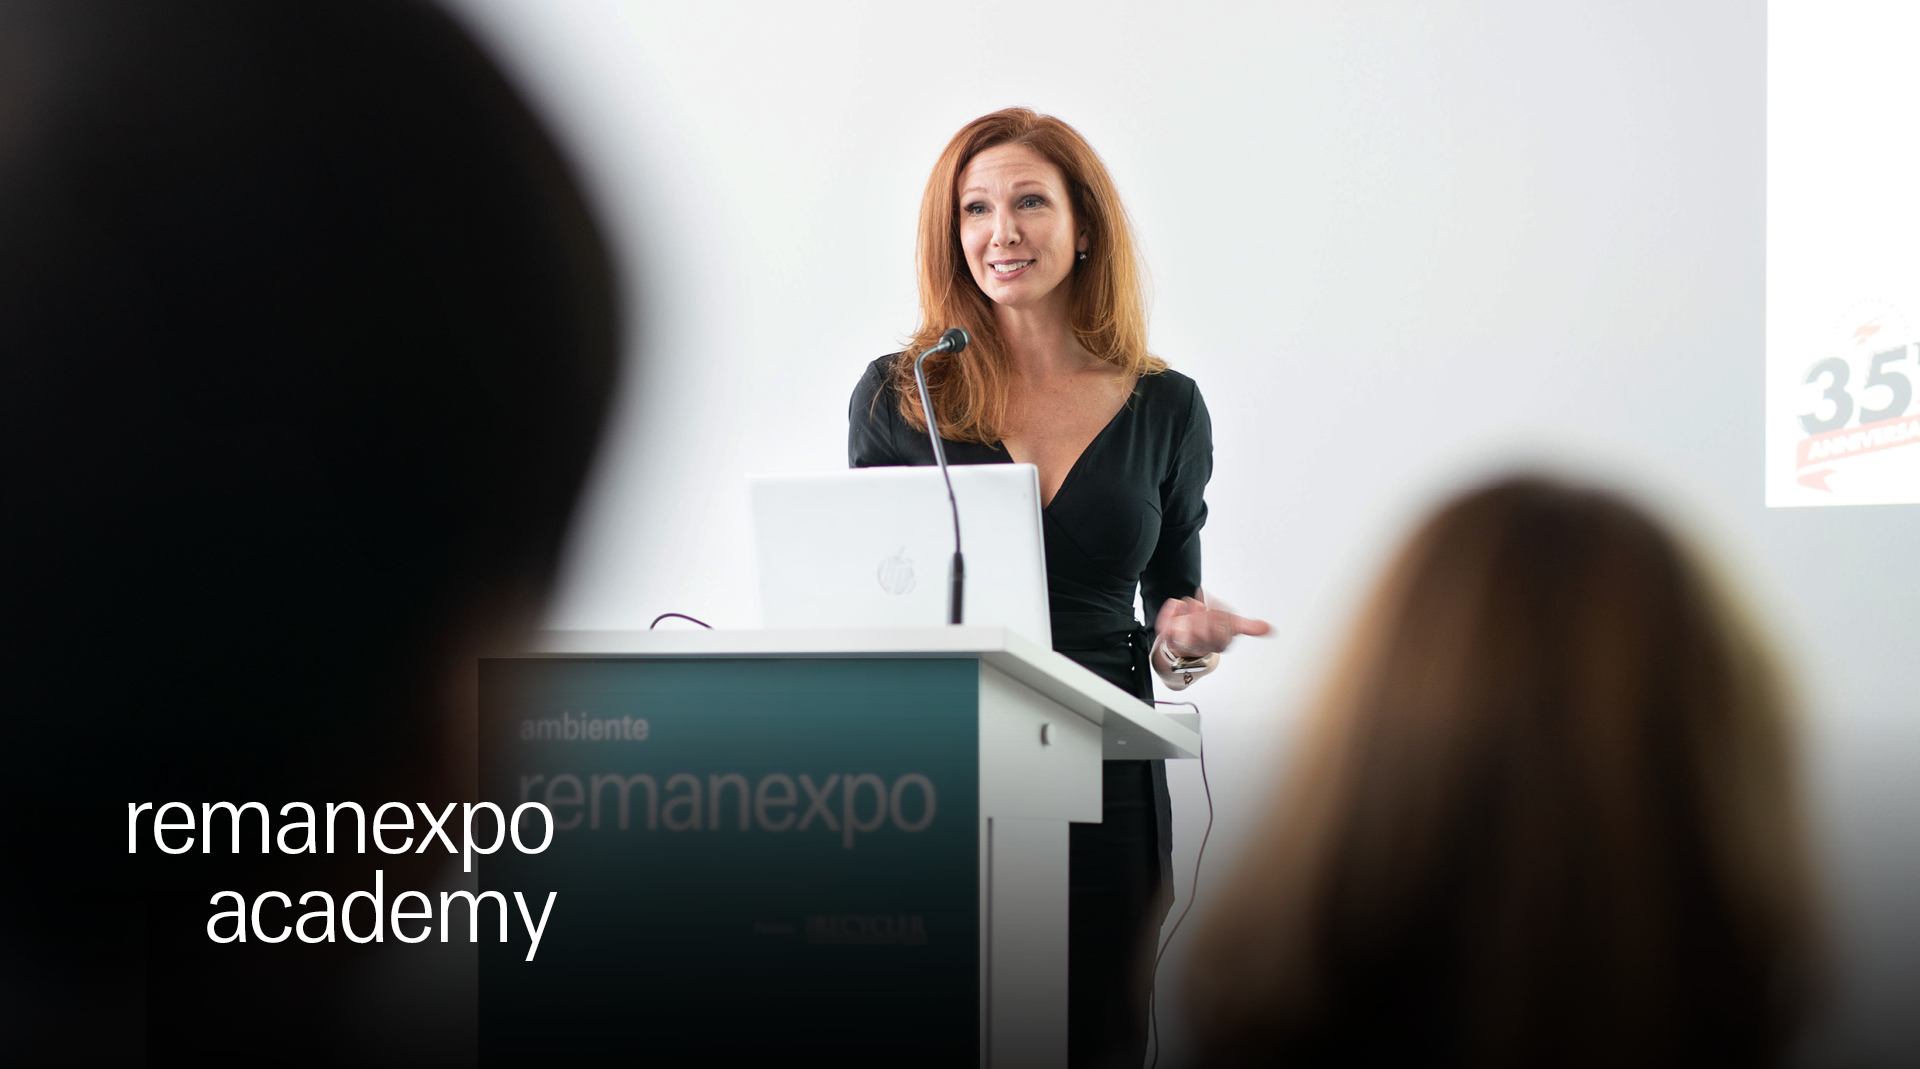 Lecture at the Remanexpo Academy